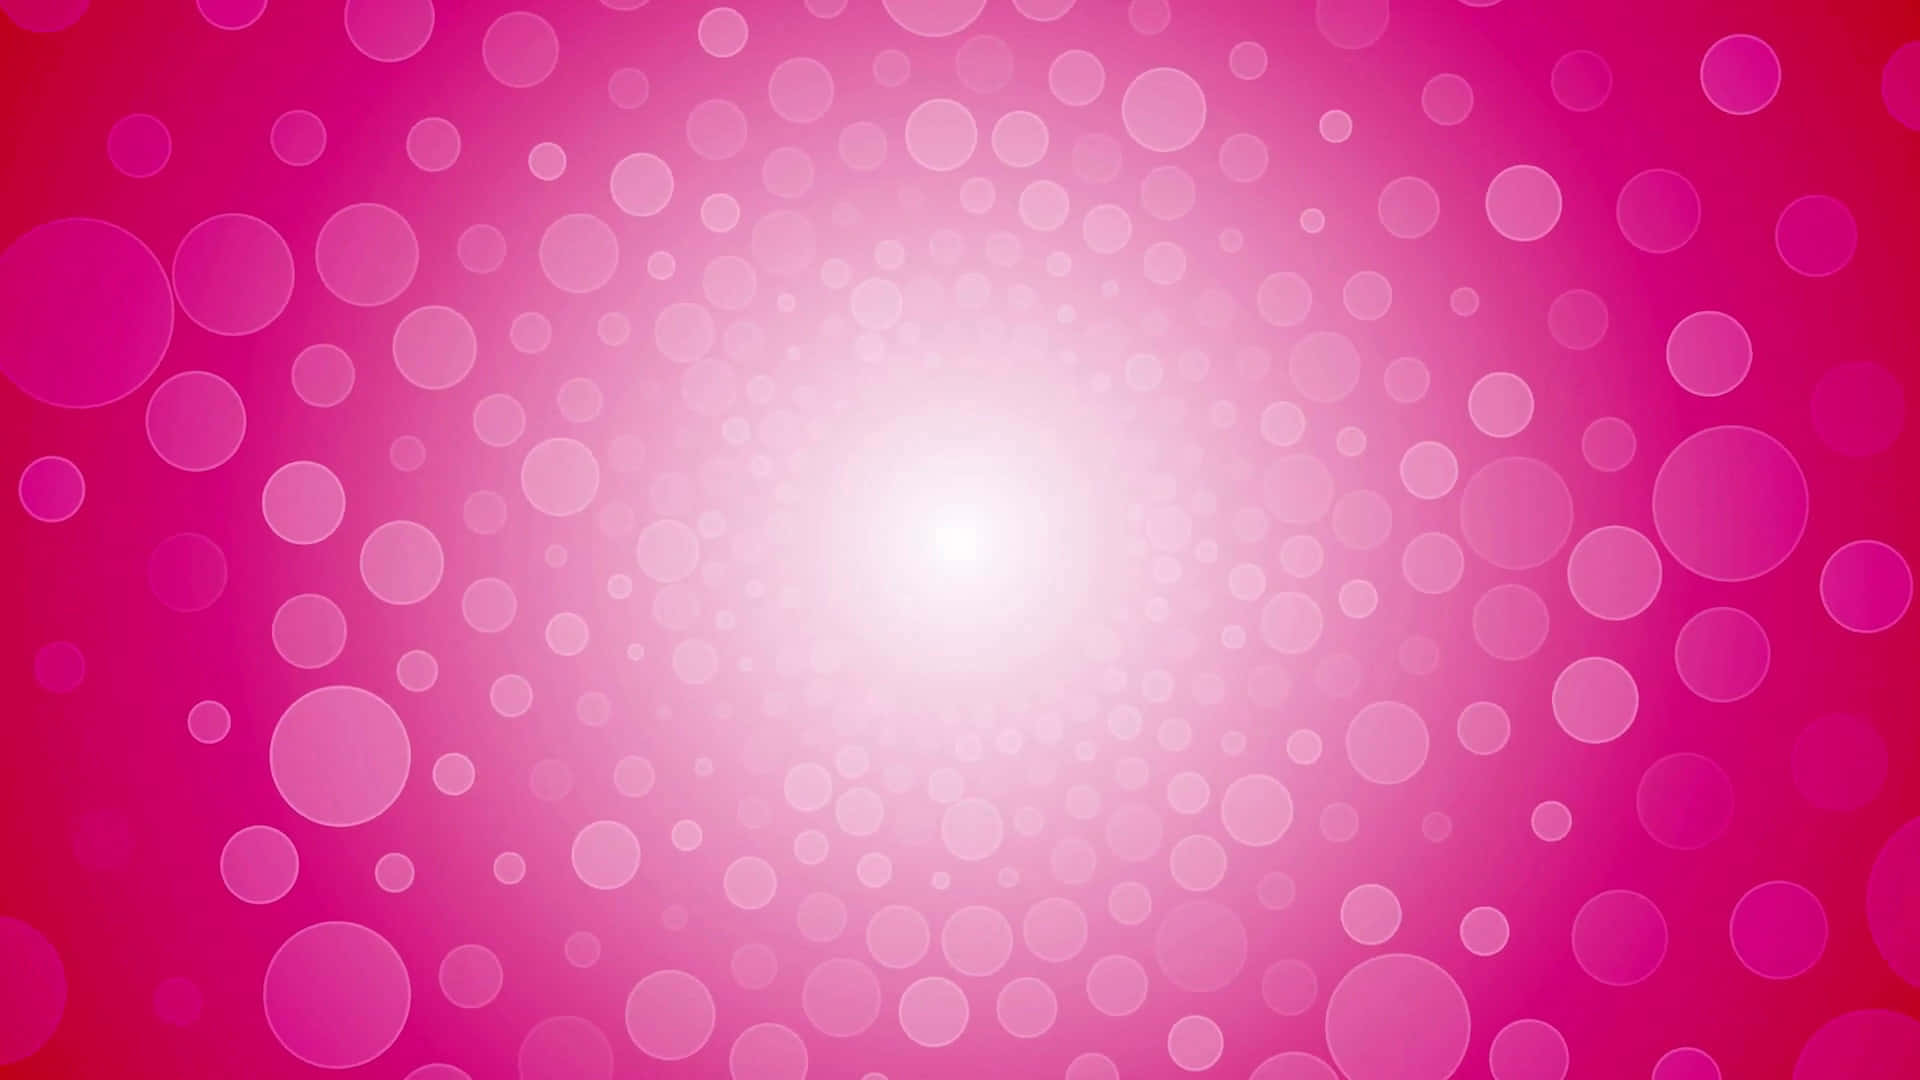 A bright and bold pink color background